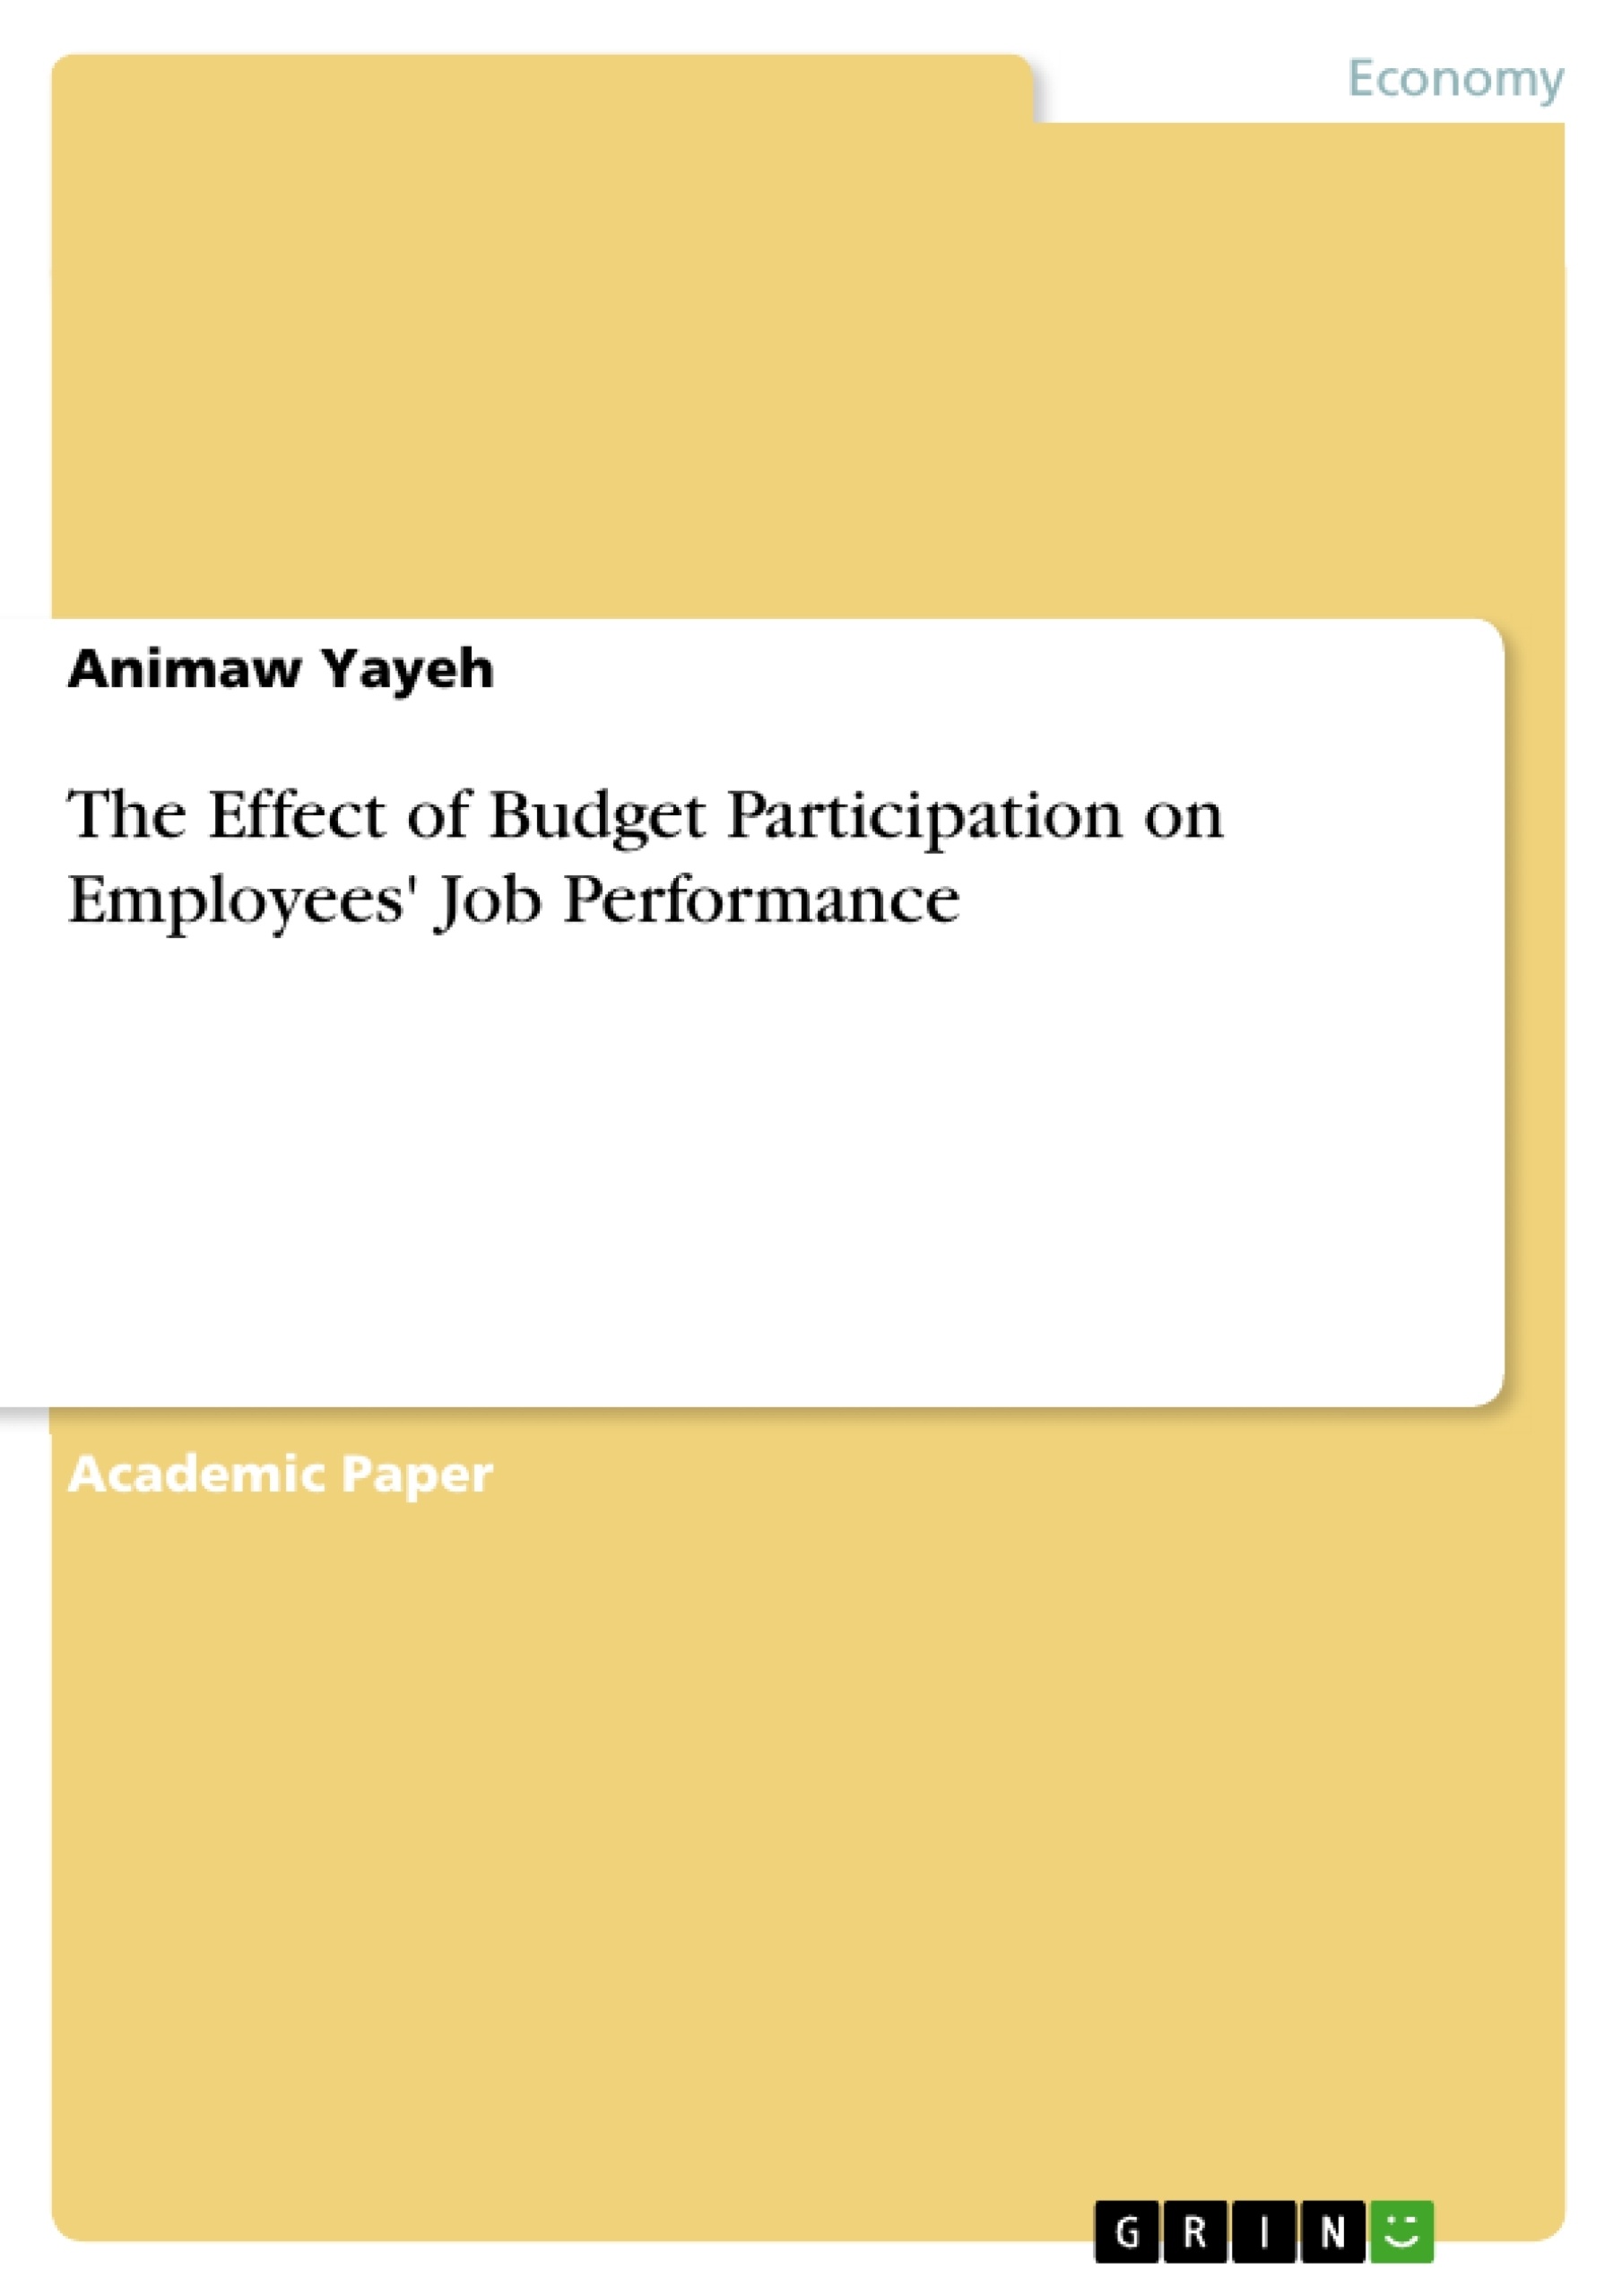 Title: The Effect of Budget Participation on Employees' Job Performance